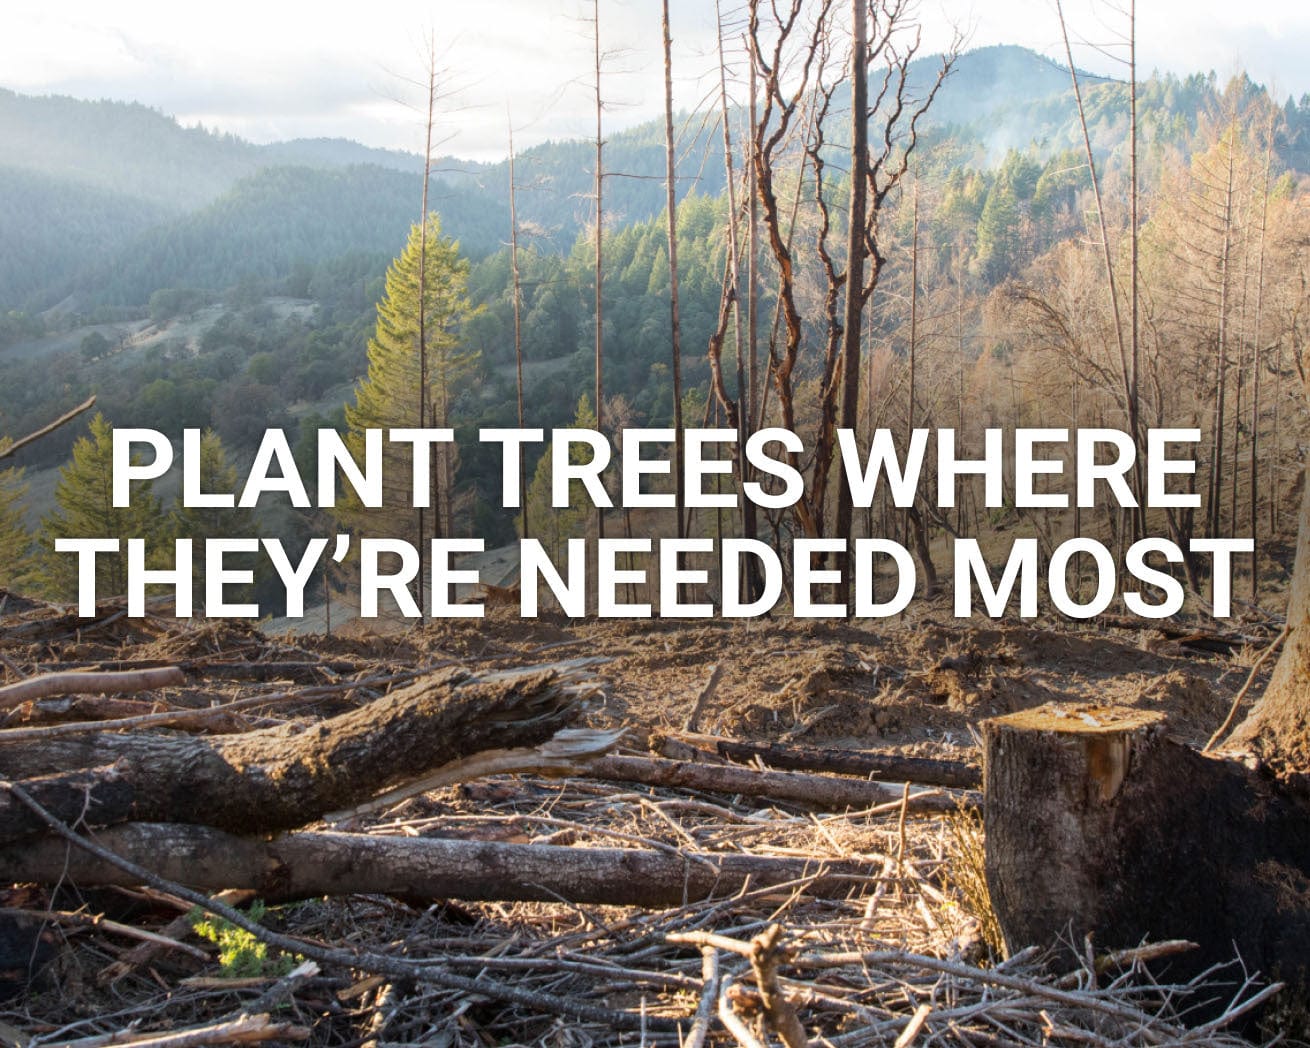 Plant trees where they’re needed most